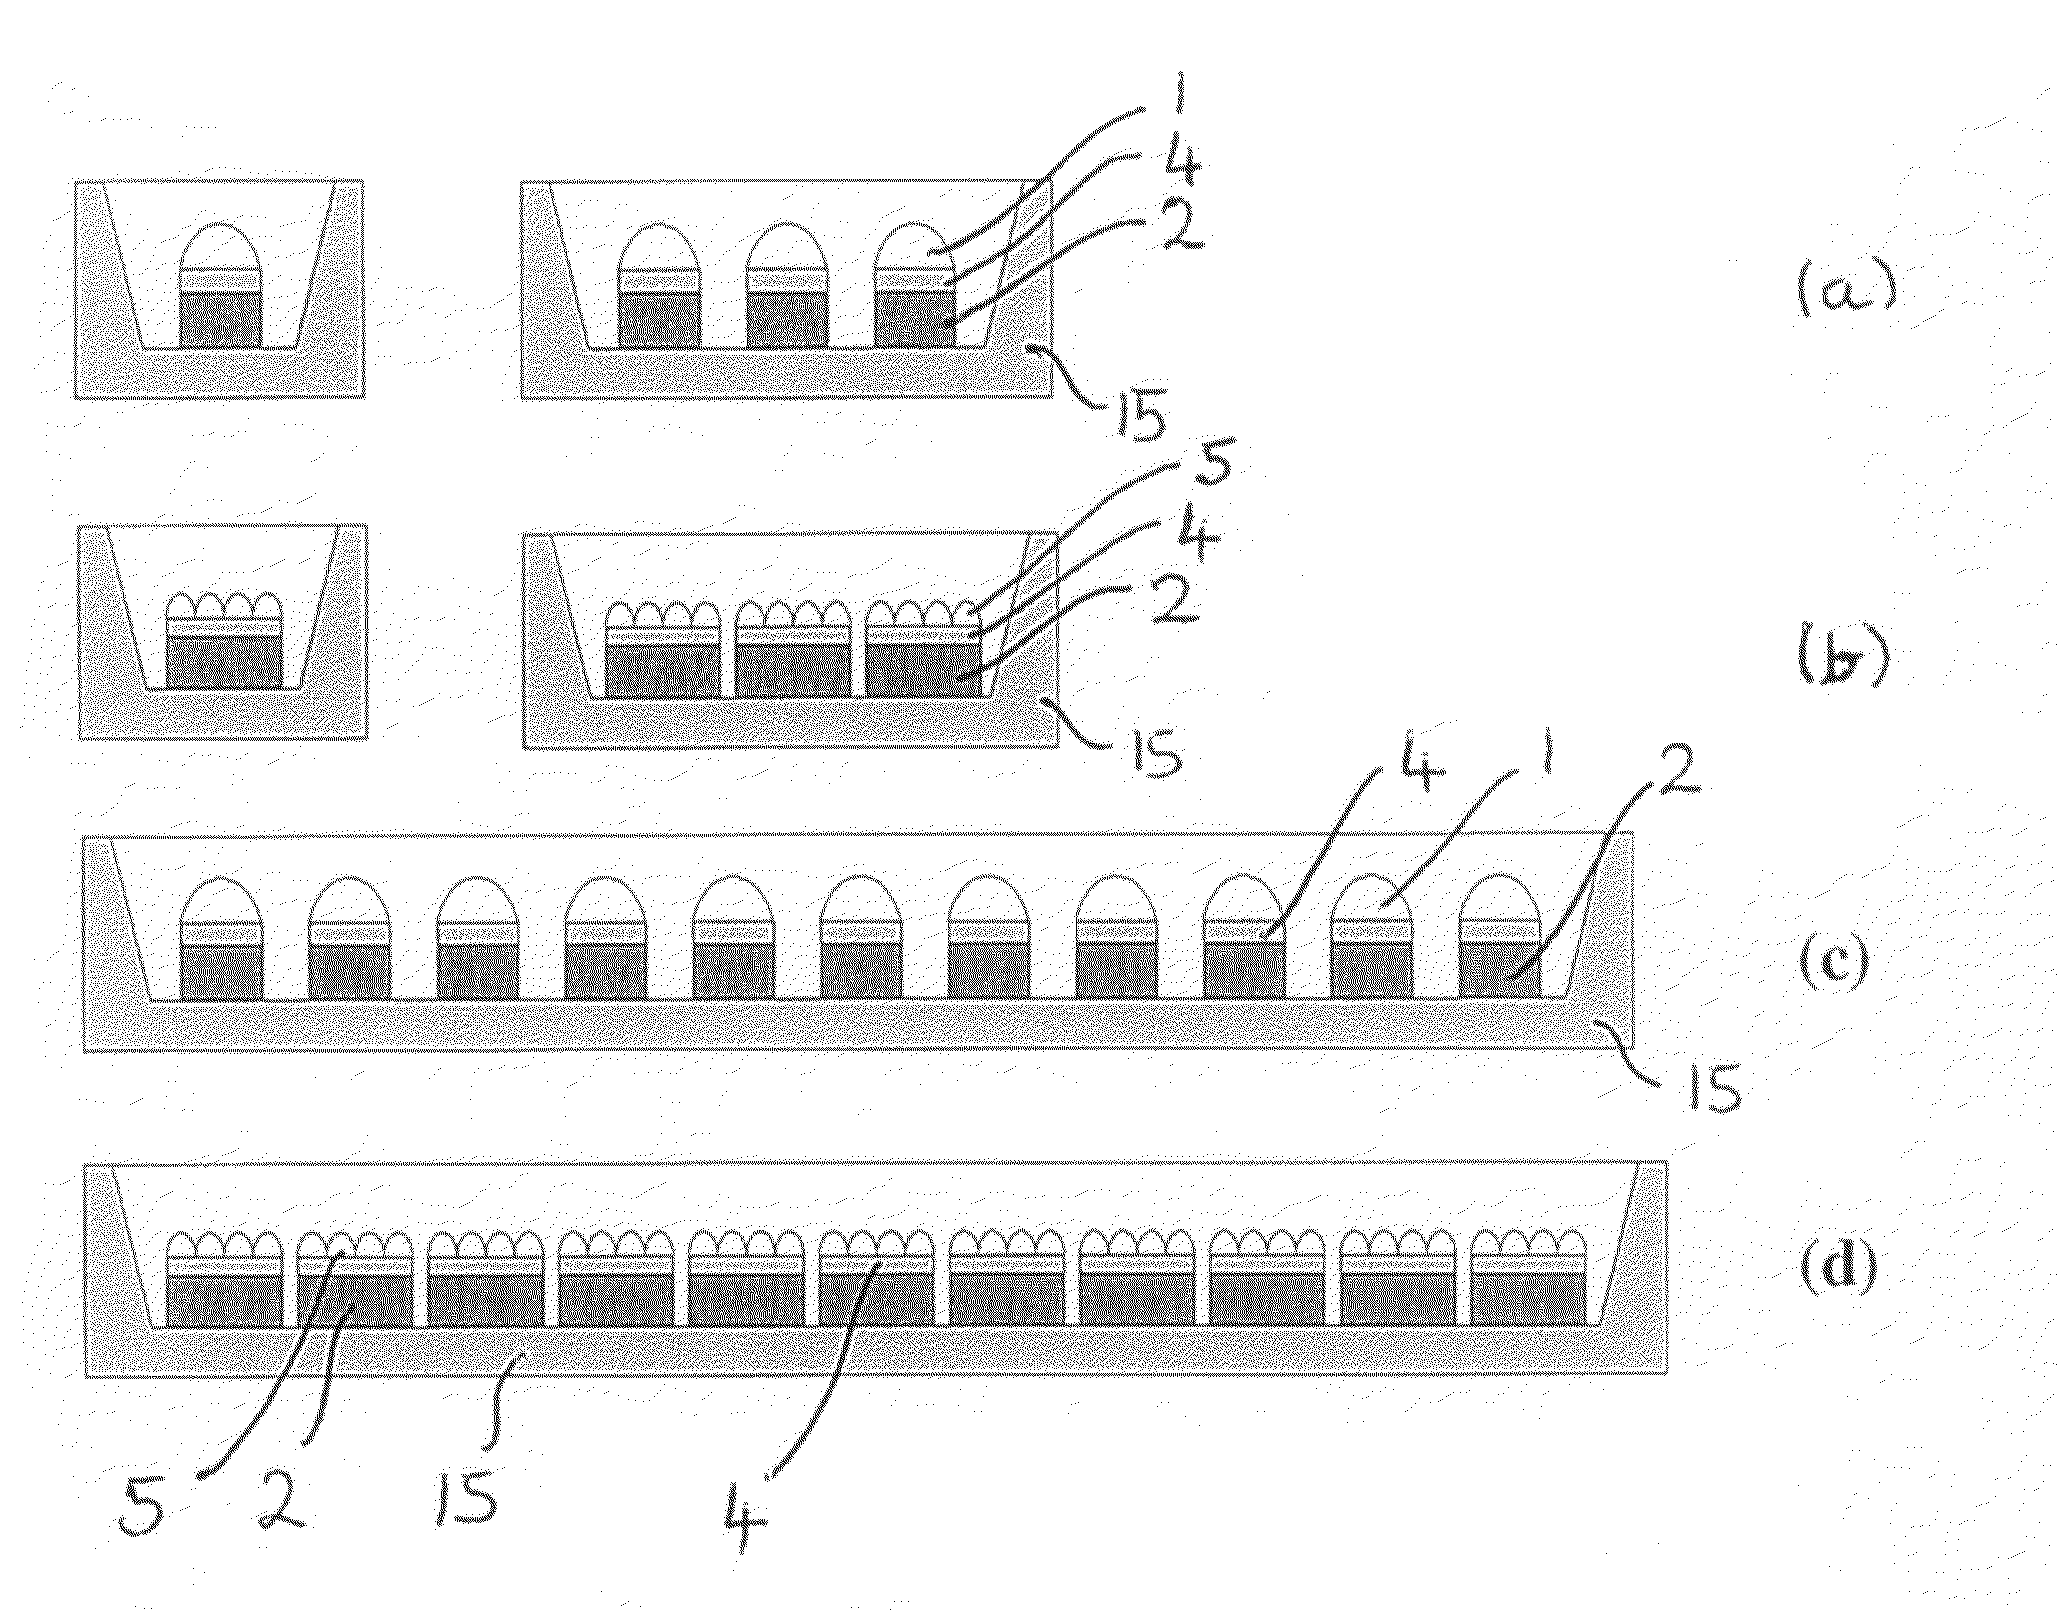 Light emitting diode assembly and method of fabrication